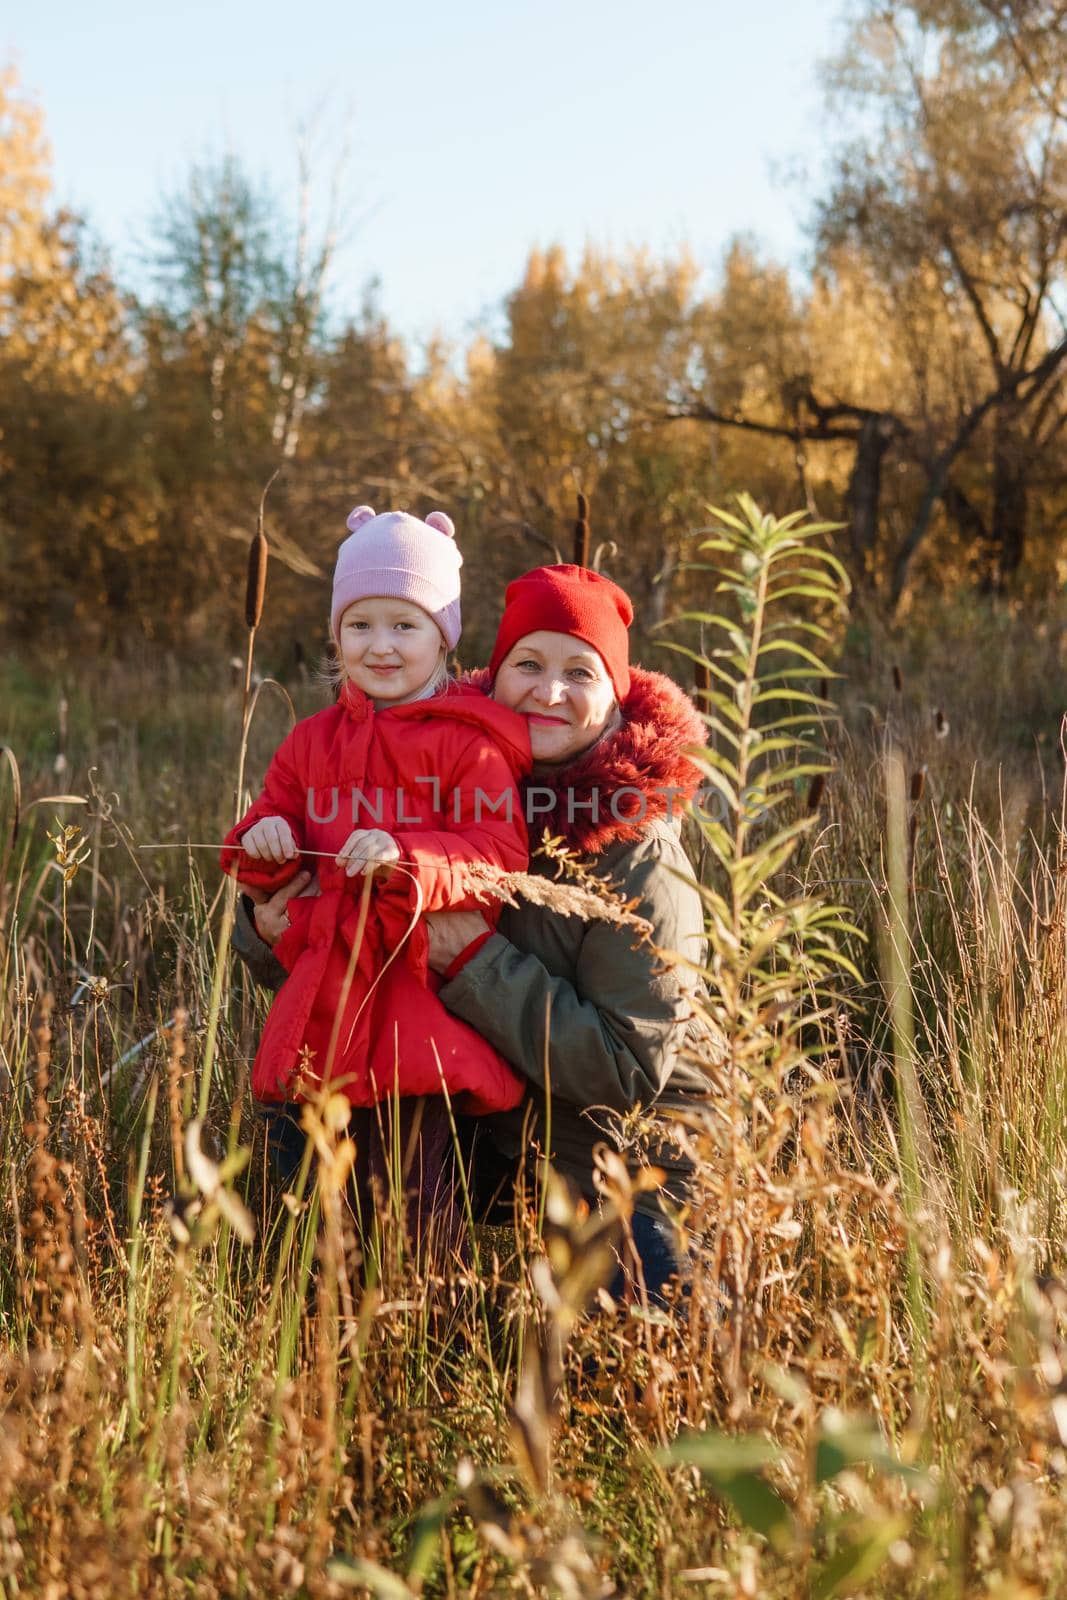 A little girl in a red coat walks in nature in an autumn grove with her grandmother. The time of the year is autumn